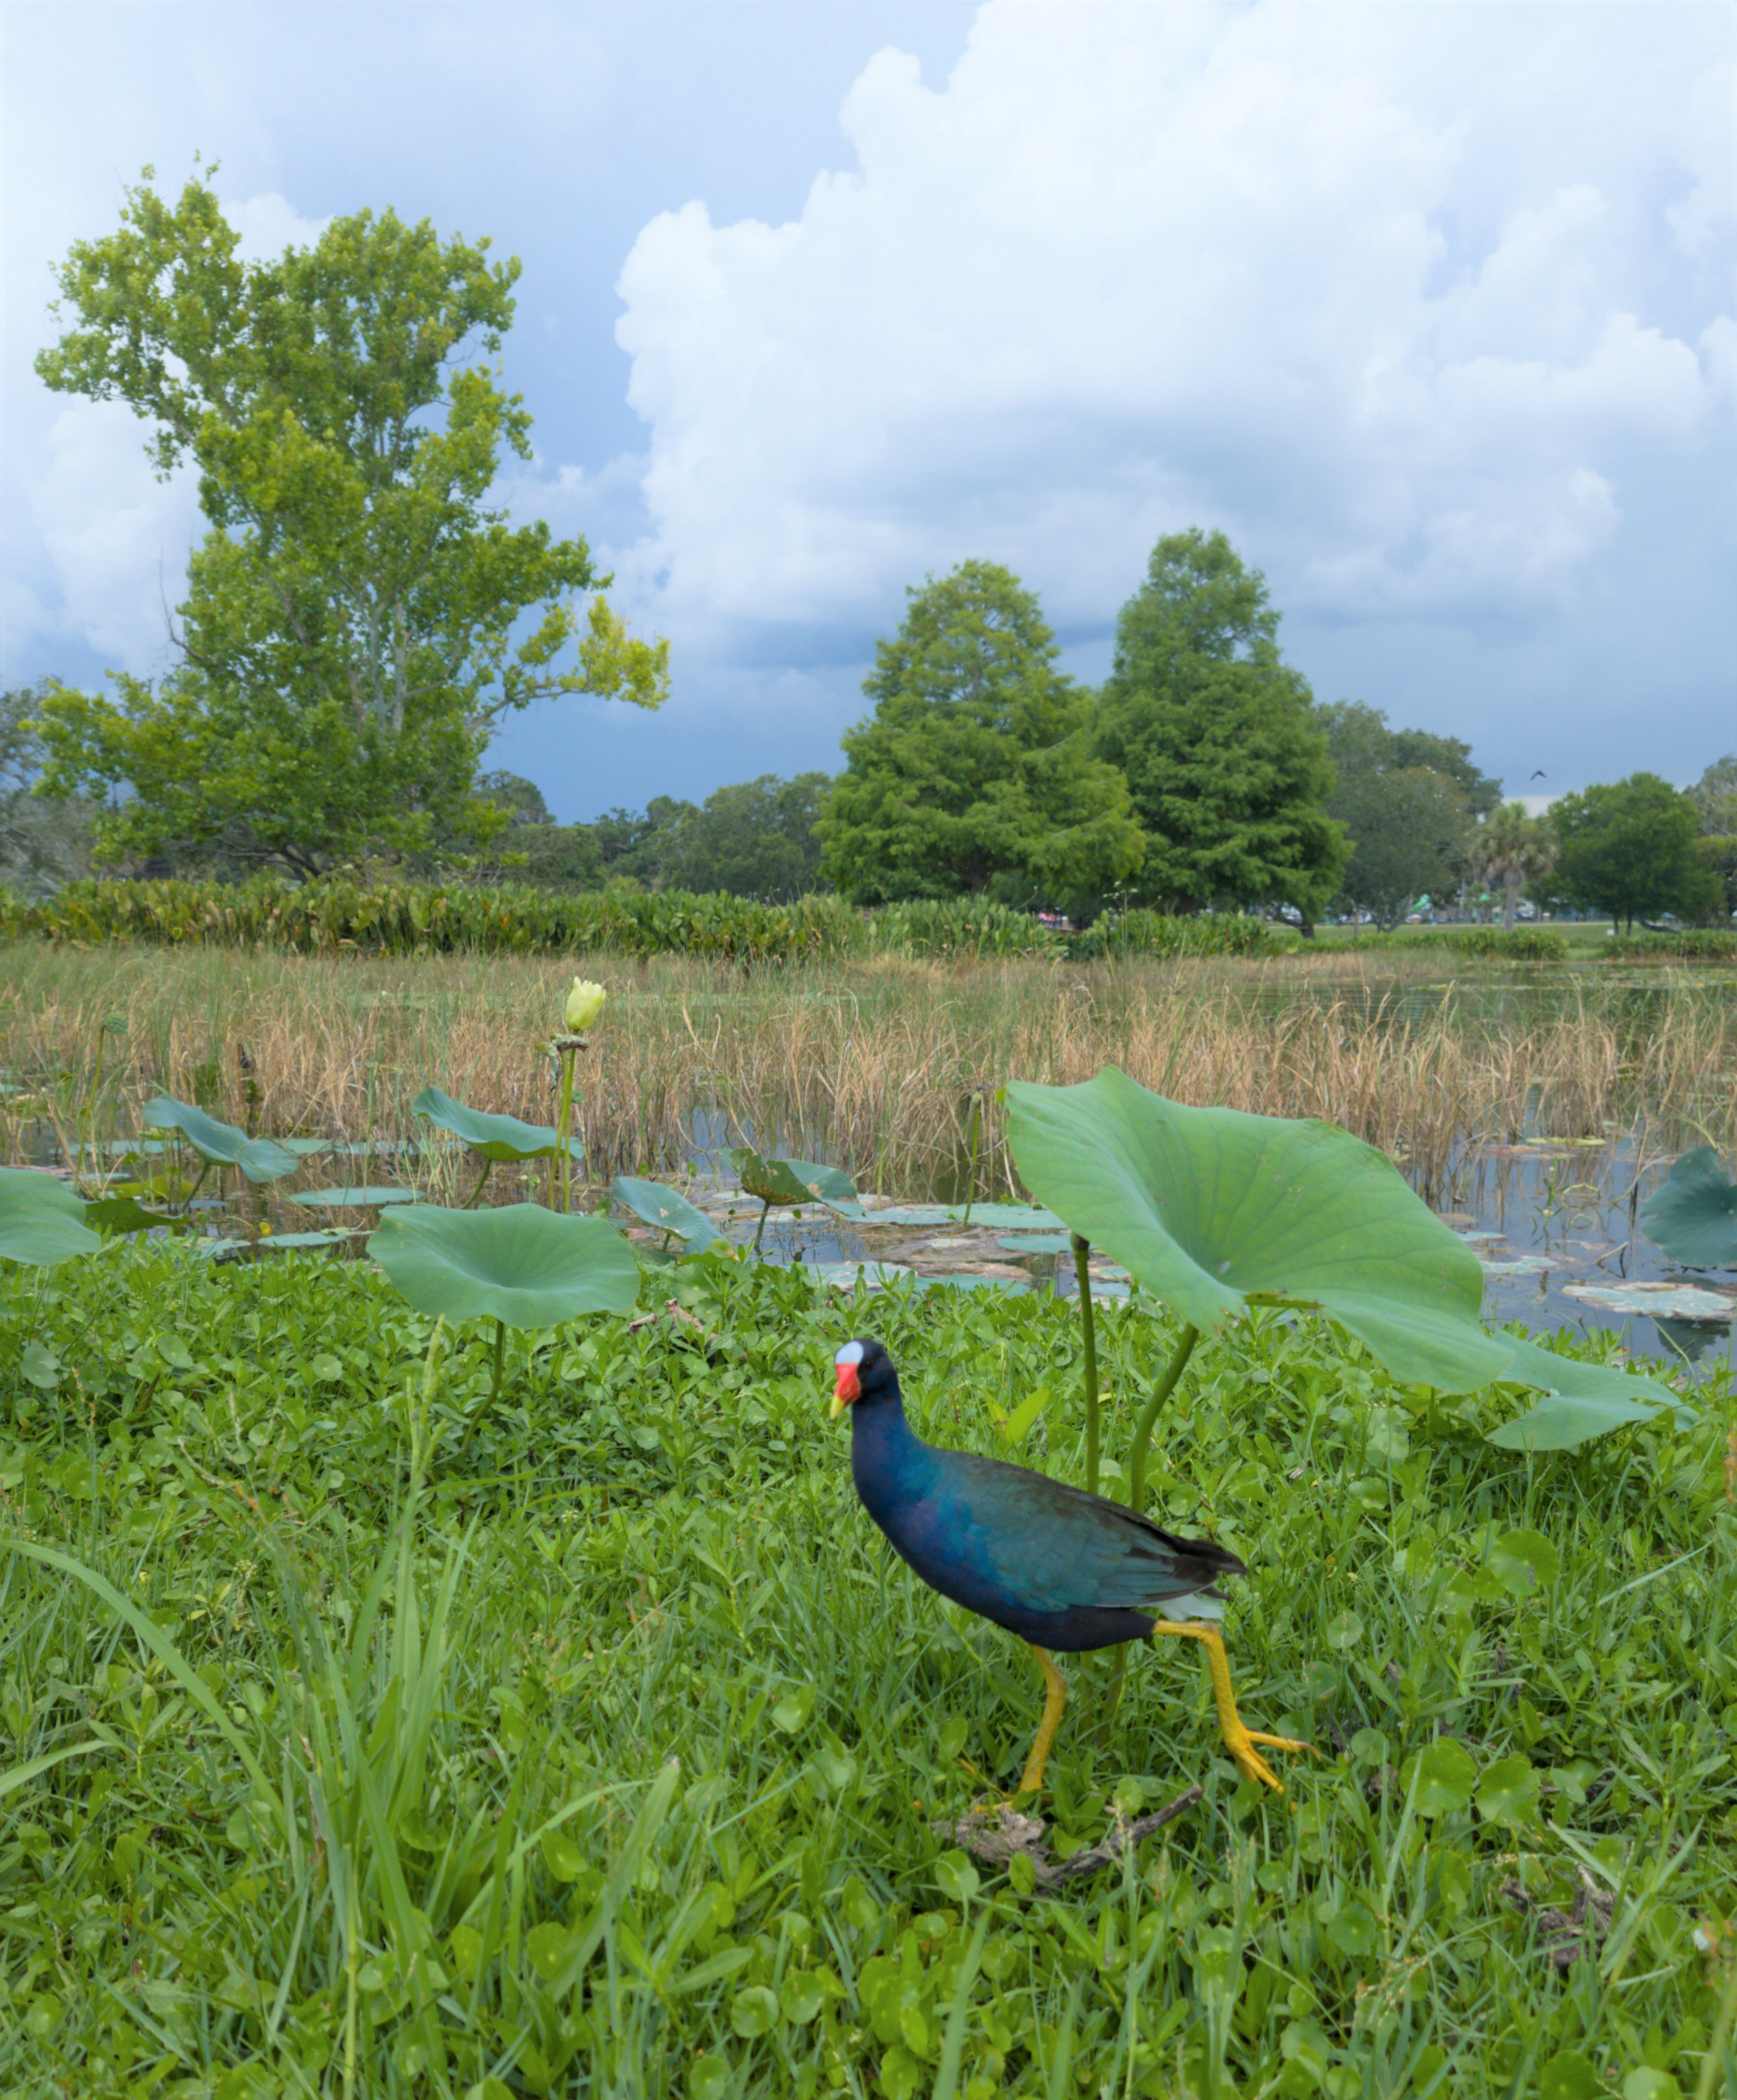 Common gallinule rushes to an appointment